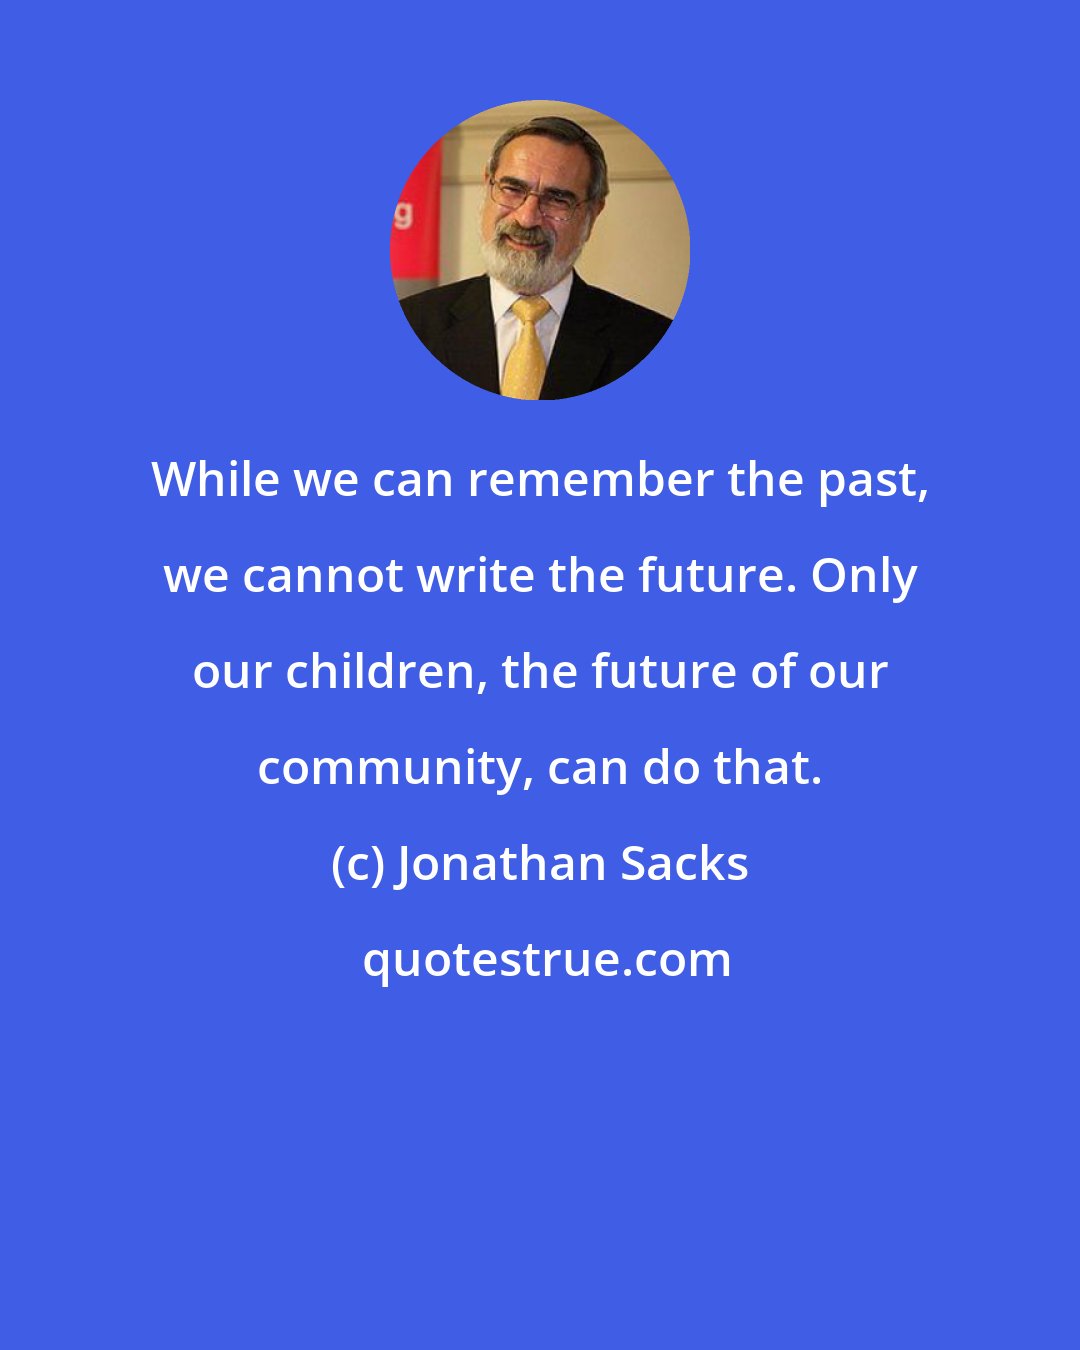 Jonathan Sacks: While we can remember the past, we cannot write the future. Only our children, the future of our community, can do that.